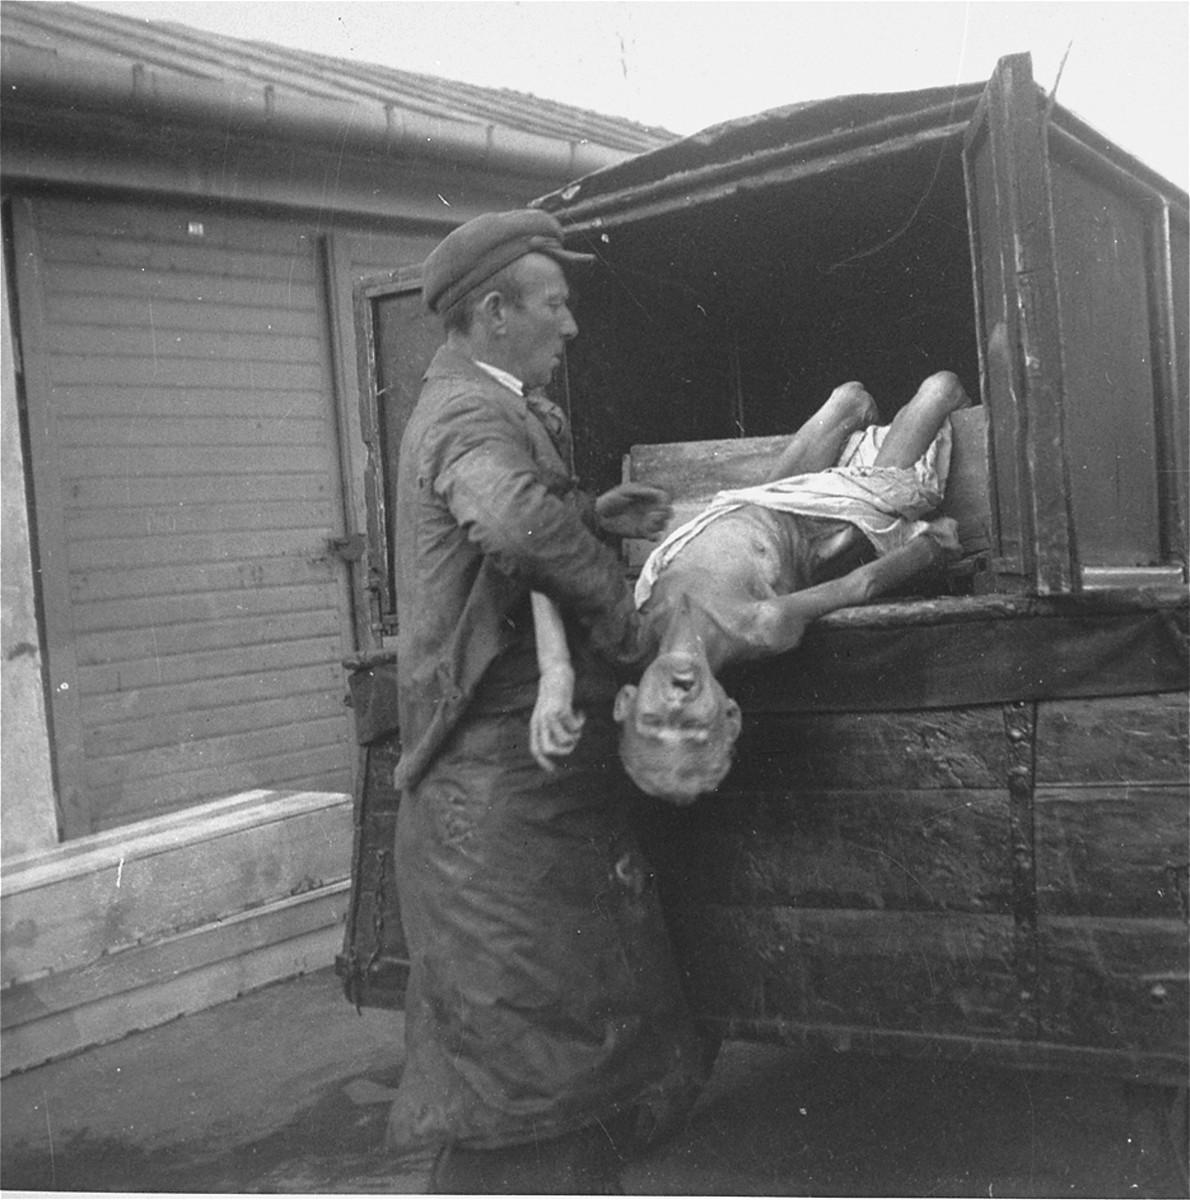 A workman pulls a corpse from a funeral wagon for burial in the Jewish cemetery on Okopowa Street.  

Joest's caption reads: "I thought at first that this dead person was a small child, but the body had gray hair."